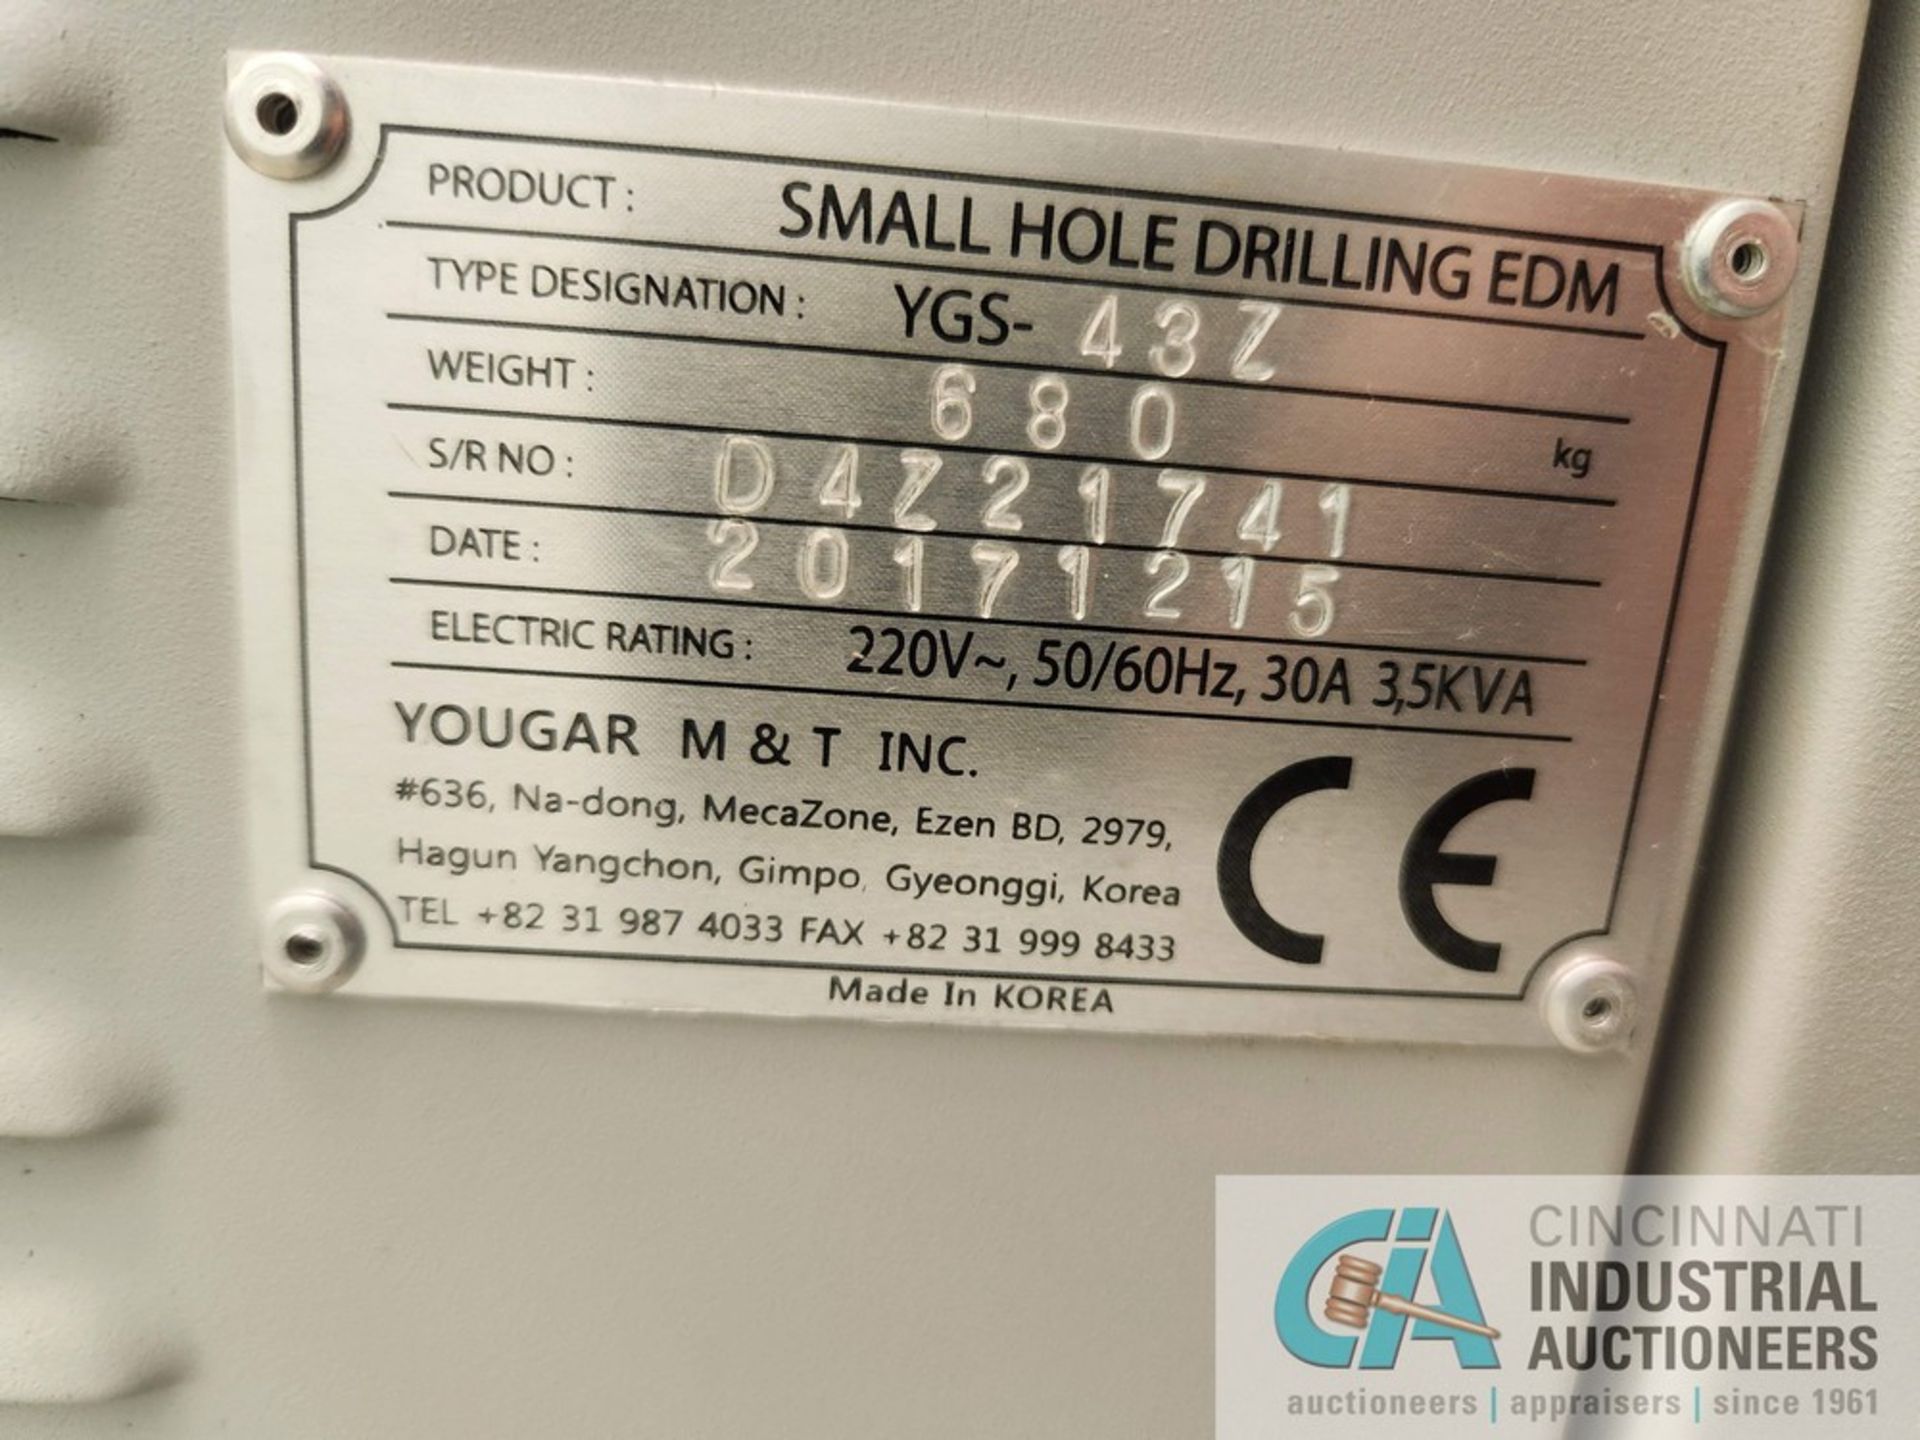 YOUGAR MODEL YGS-43Z SMALL HOLE EDM DRILL; S/N D4Z21741, CLOSED LOOP FILTRATION, 3-AXIS DRO, - Image 9 of 10